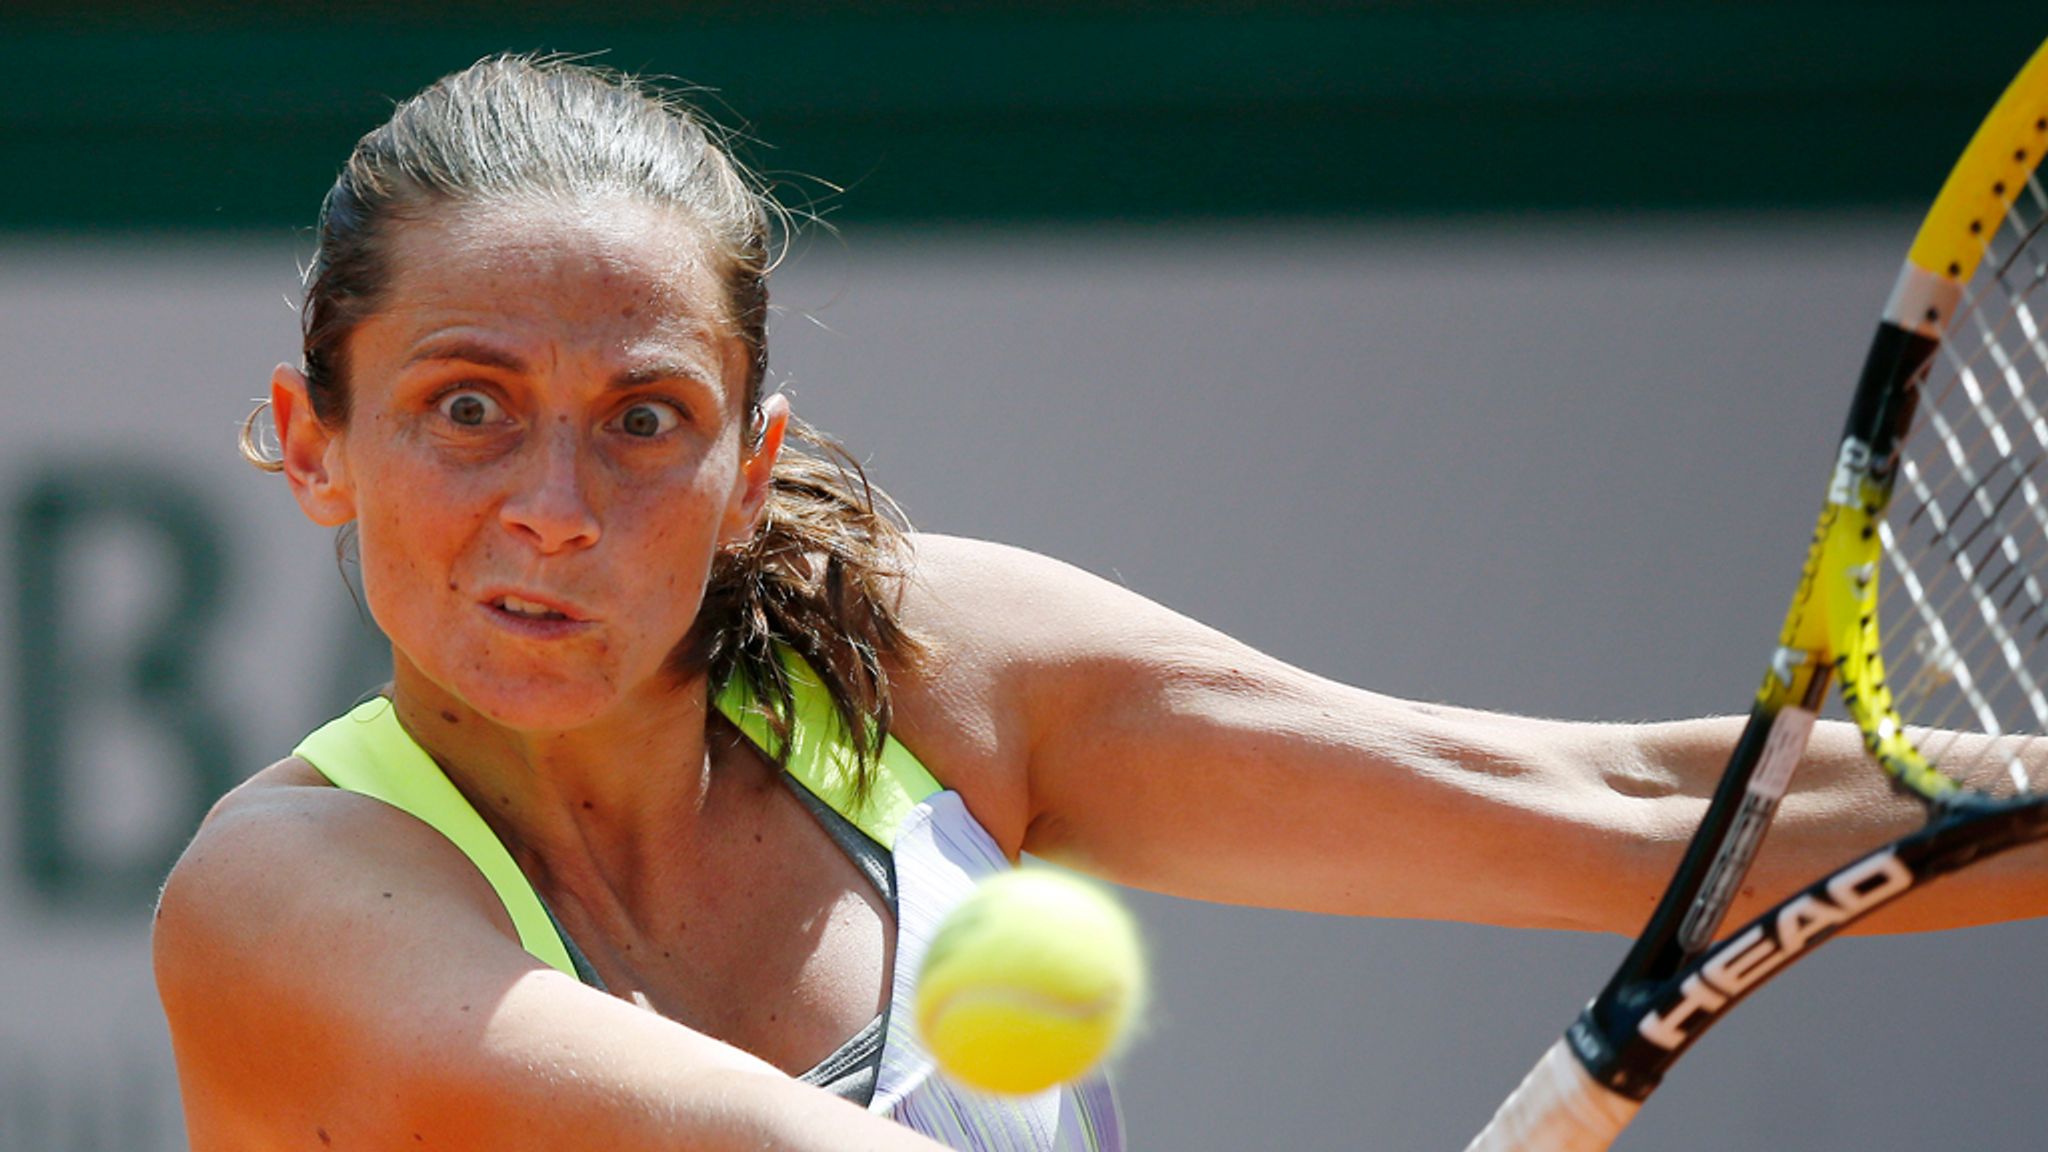 WTA Rogers Cup Roberta Vinci comes from behind to beat Julia Goerges